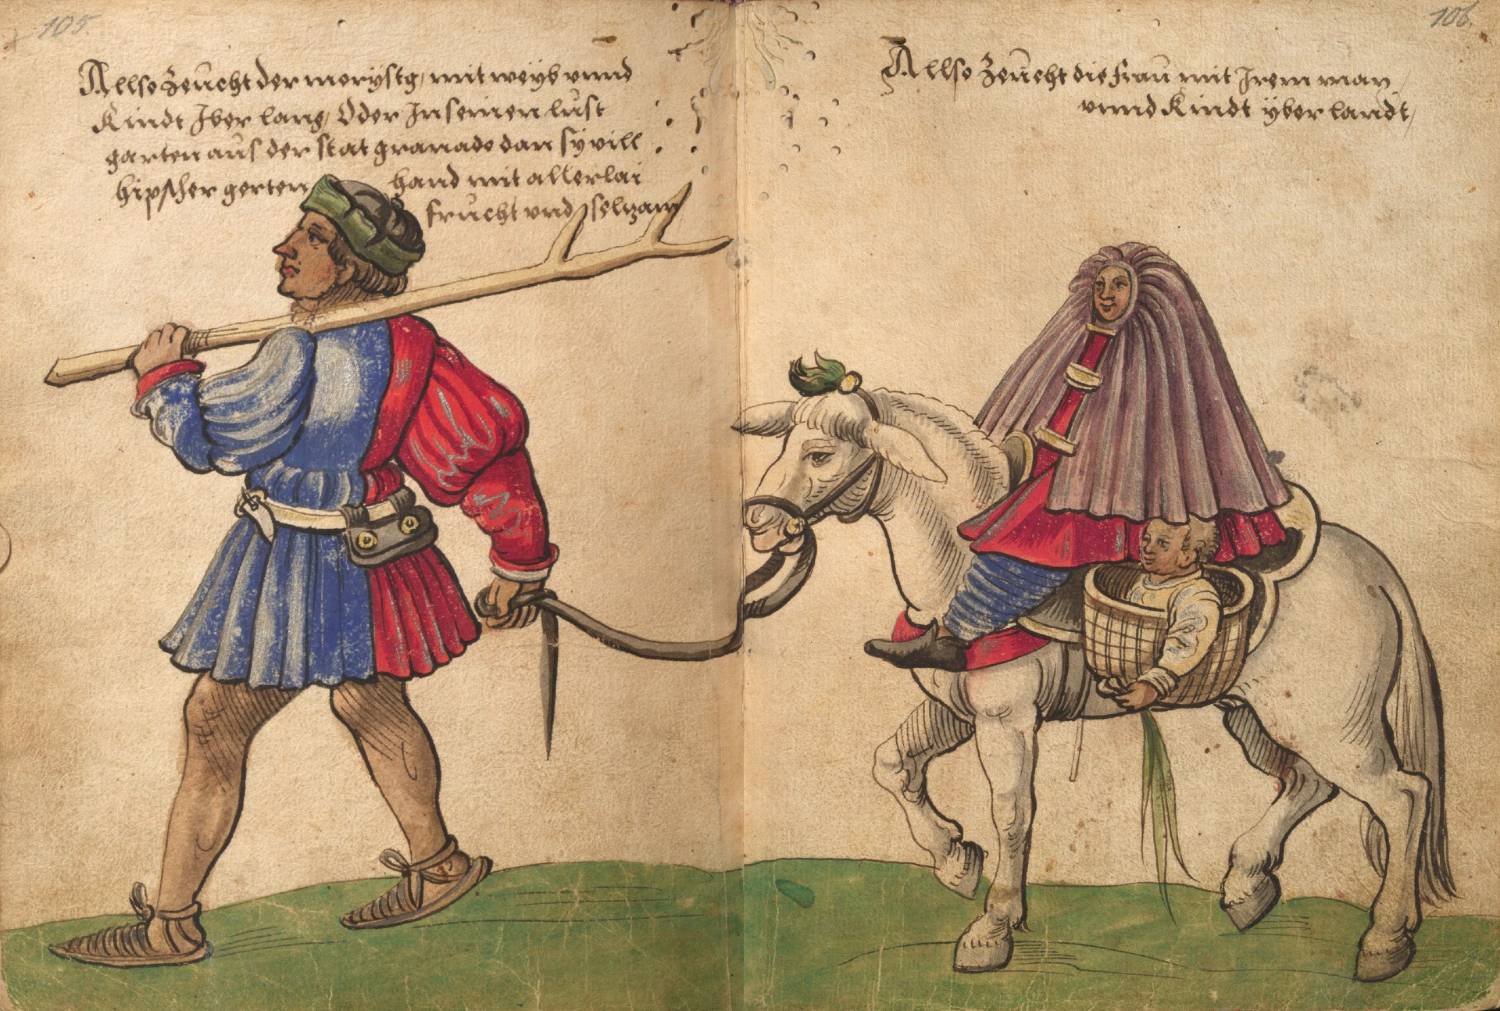 Moriscos are depicted here in this 16th century German book "Trachtenbuch", National Museum Nurnberg (Public domain)